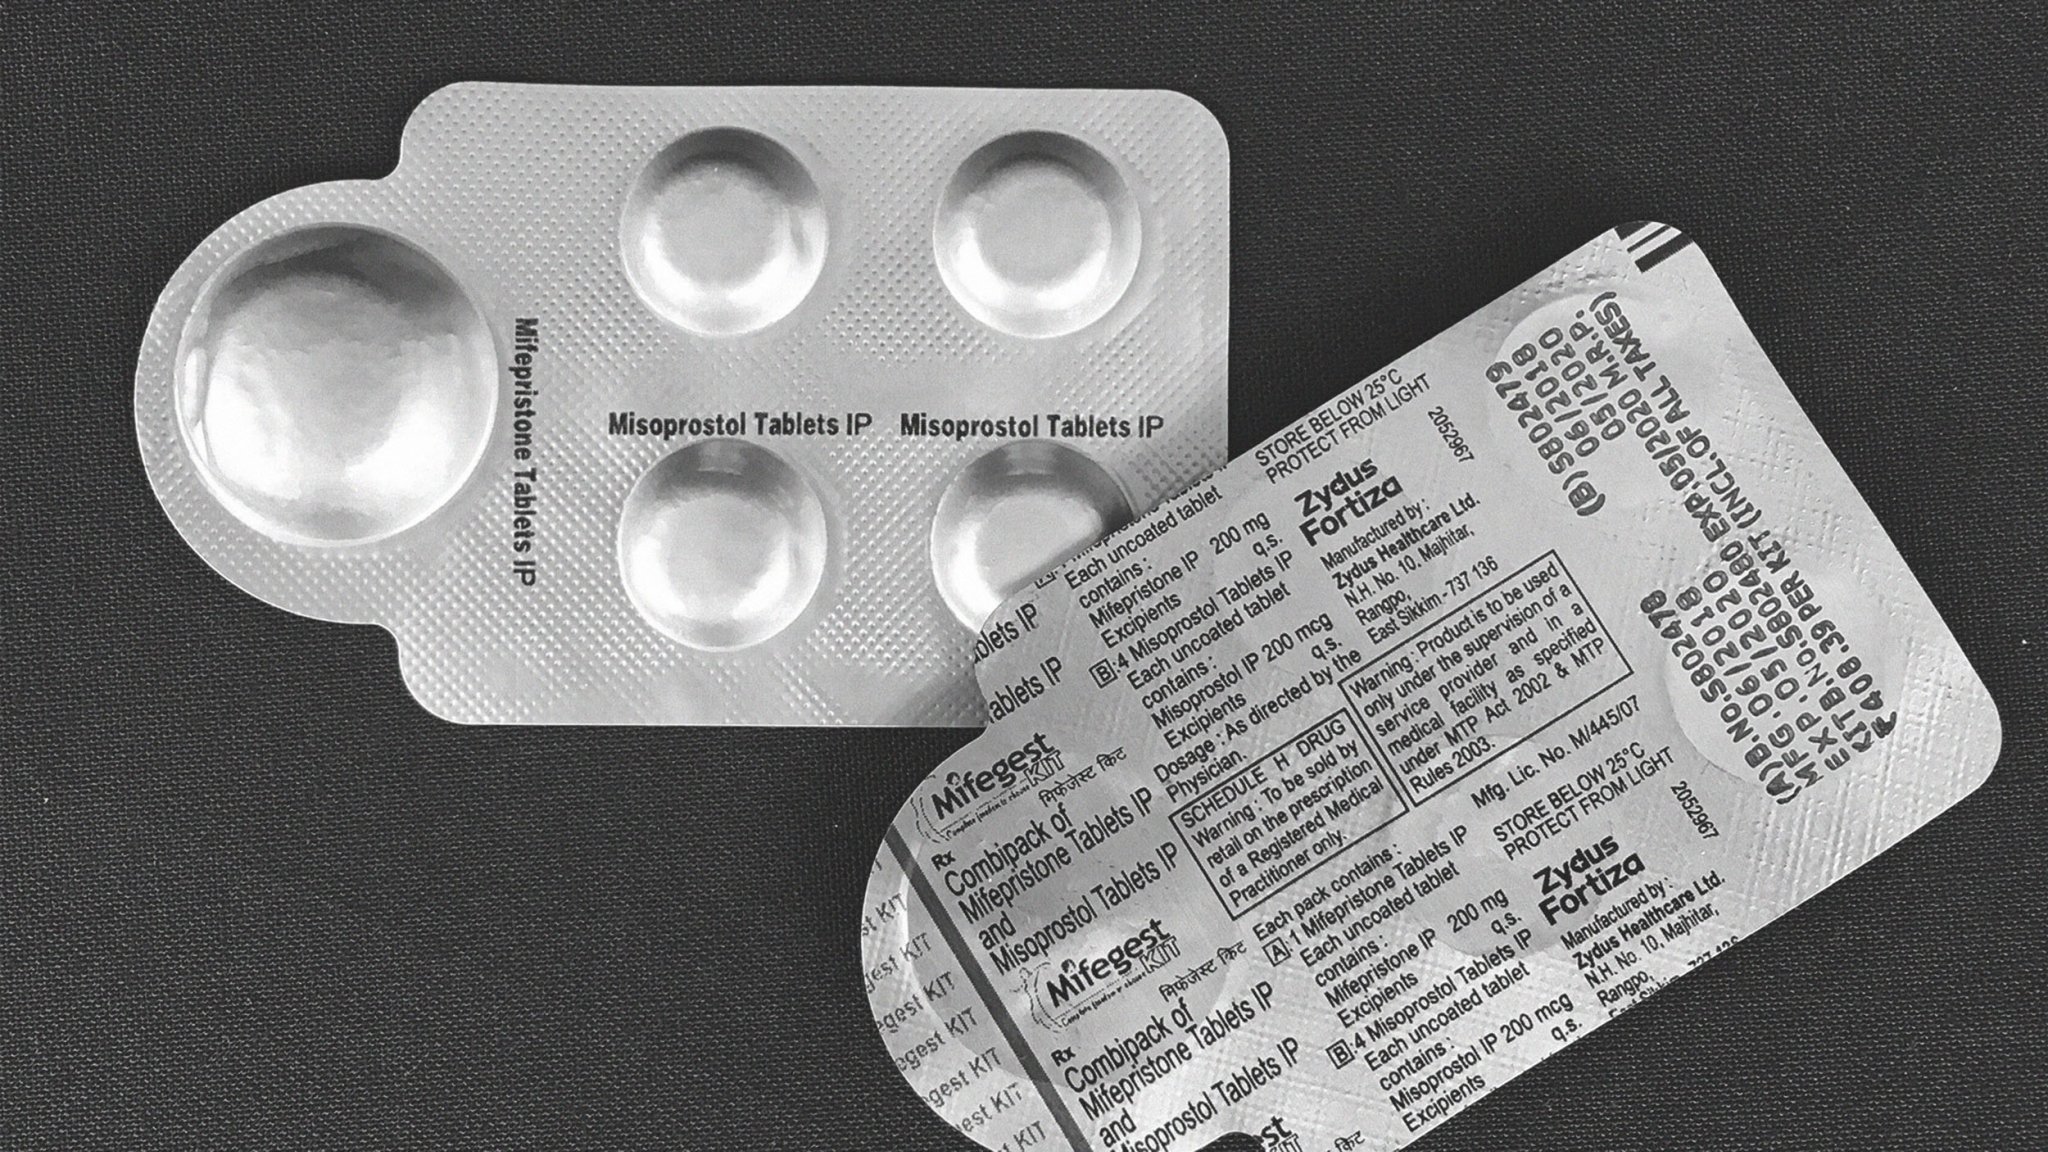 A new legal battle post-Roe: Can states ban FDA-approved abortion pills?